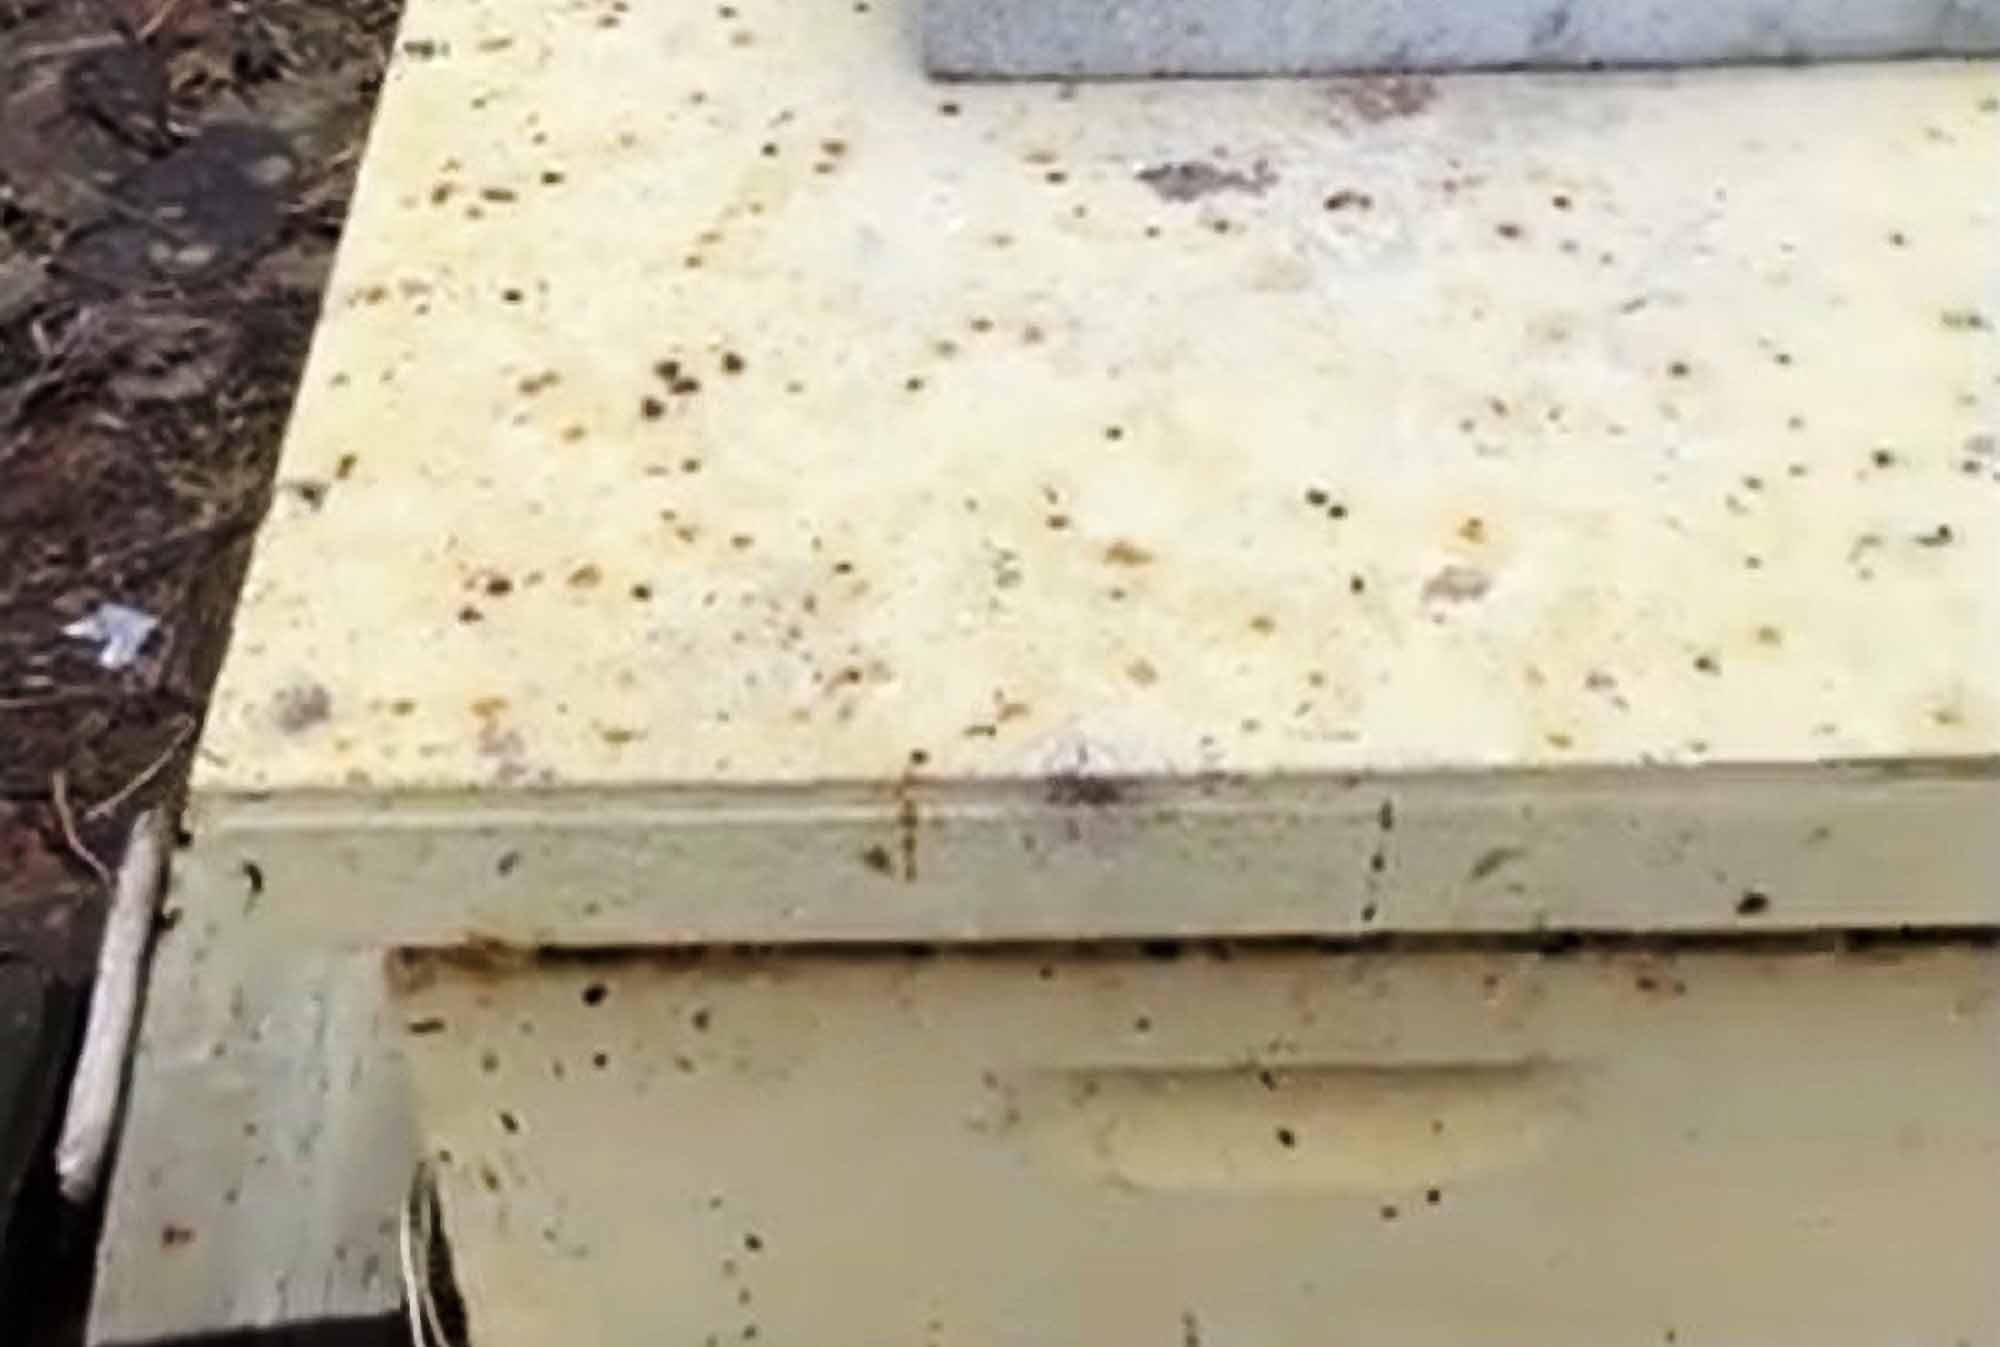 Couple Sue Beekeepers Over Pollen Poop Covering Their Home